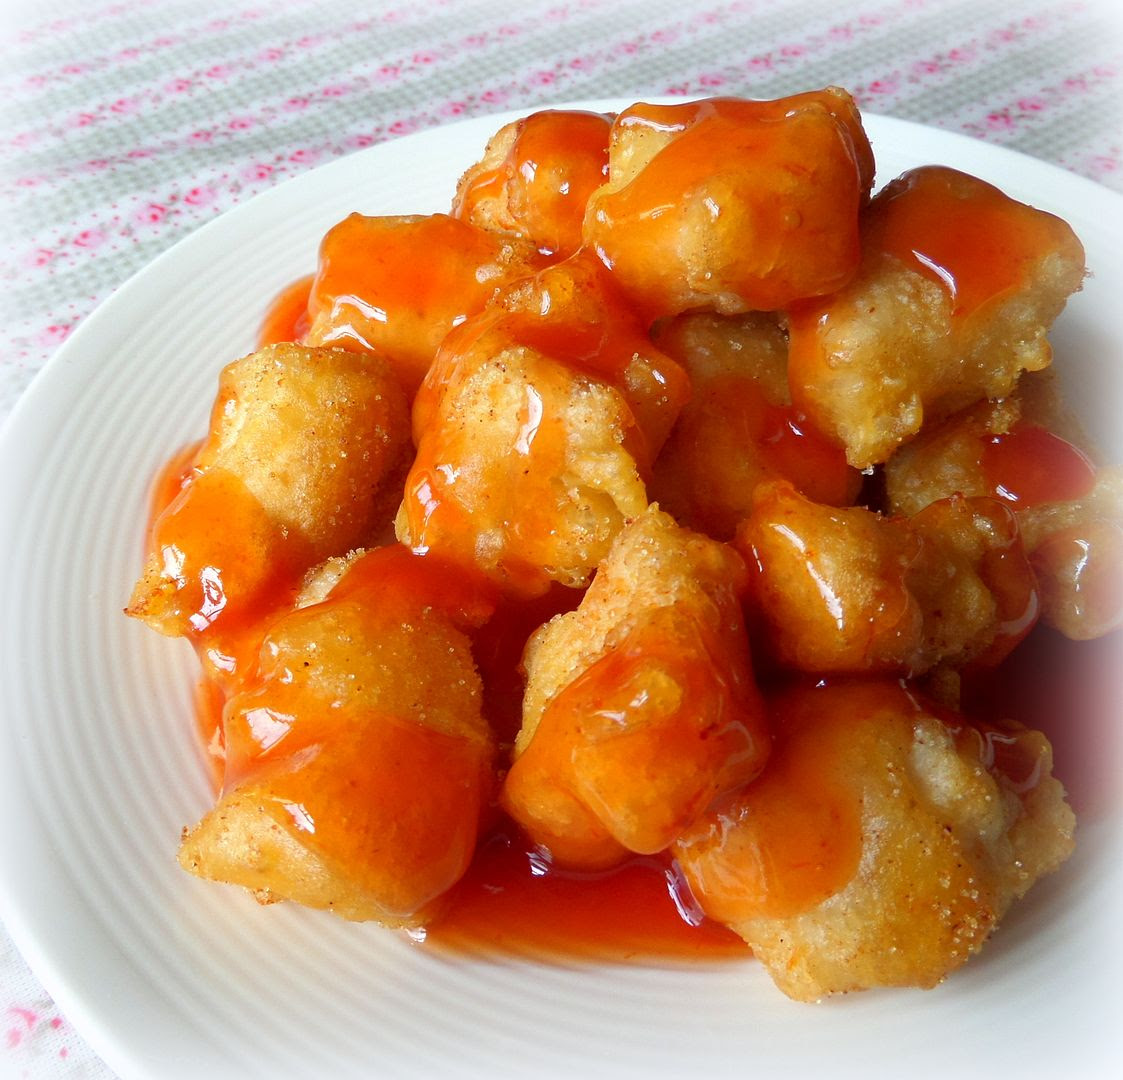 Sweet And Sour Chicken Balls